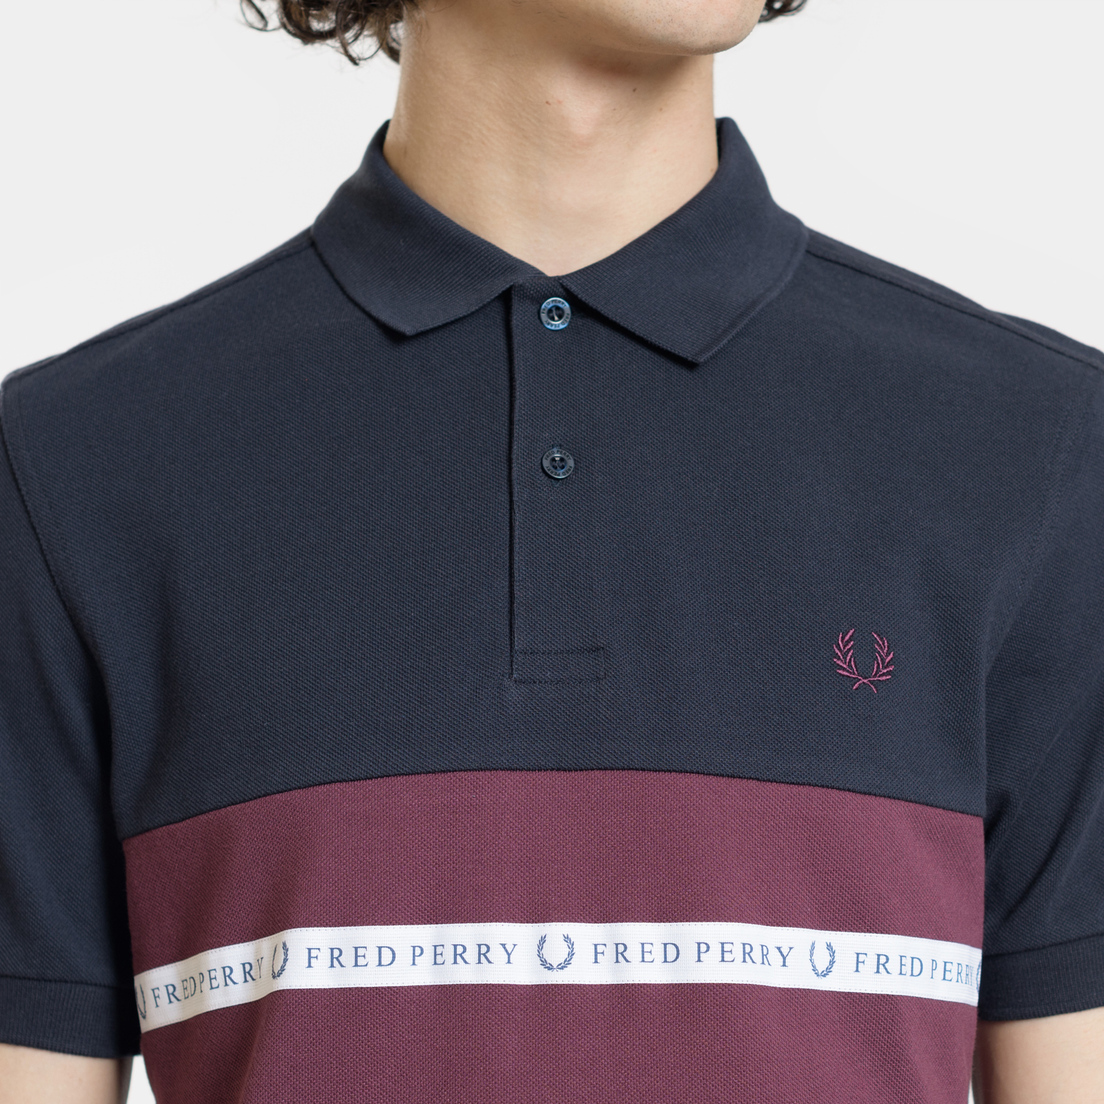 Fred Perry Мужское поло Sports Tape Pique